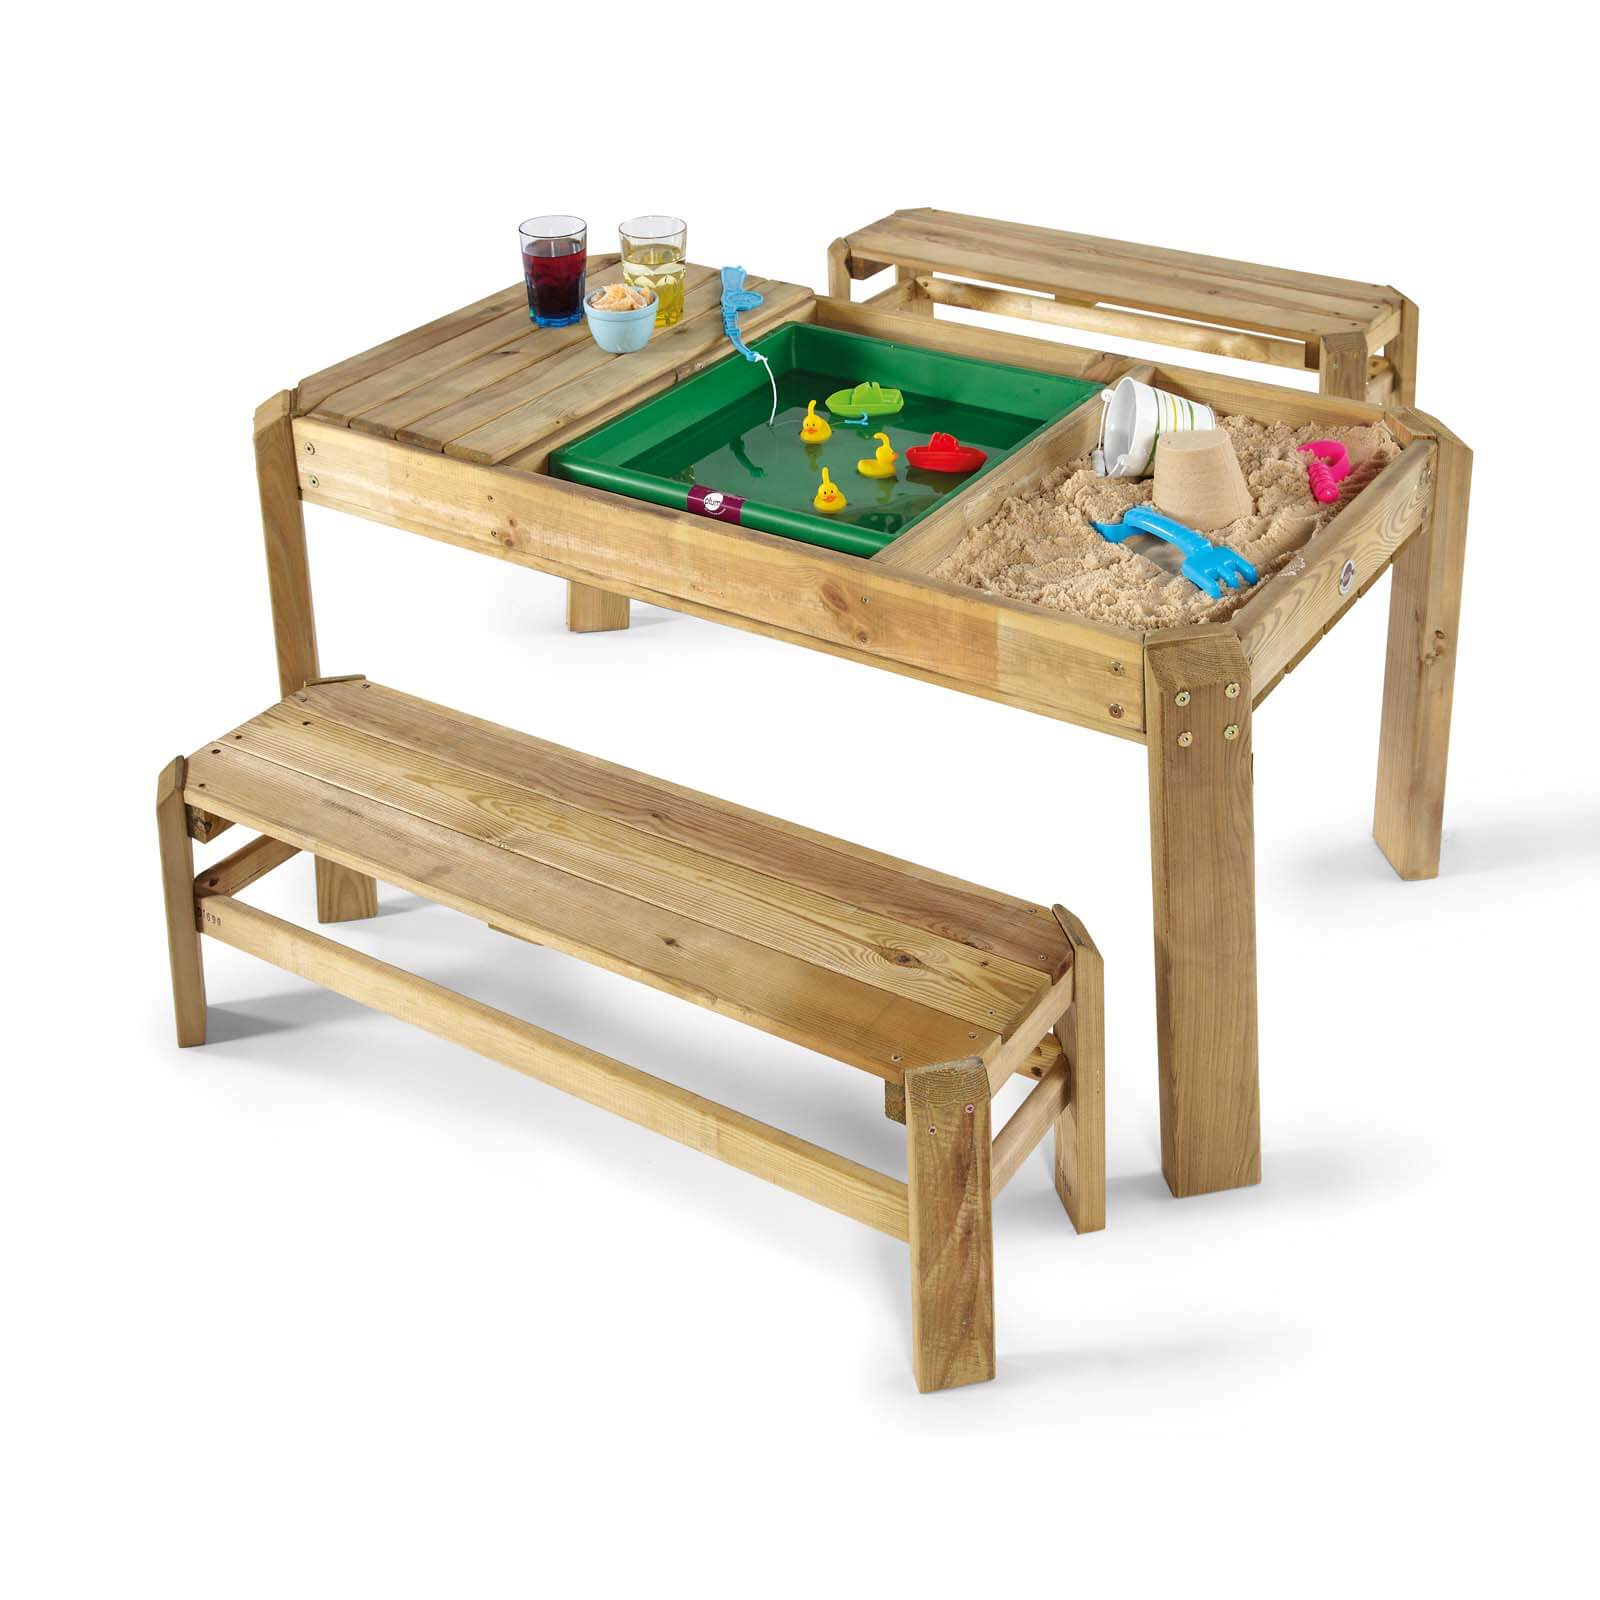 Plum Wooden Activity Table & Benches